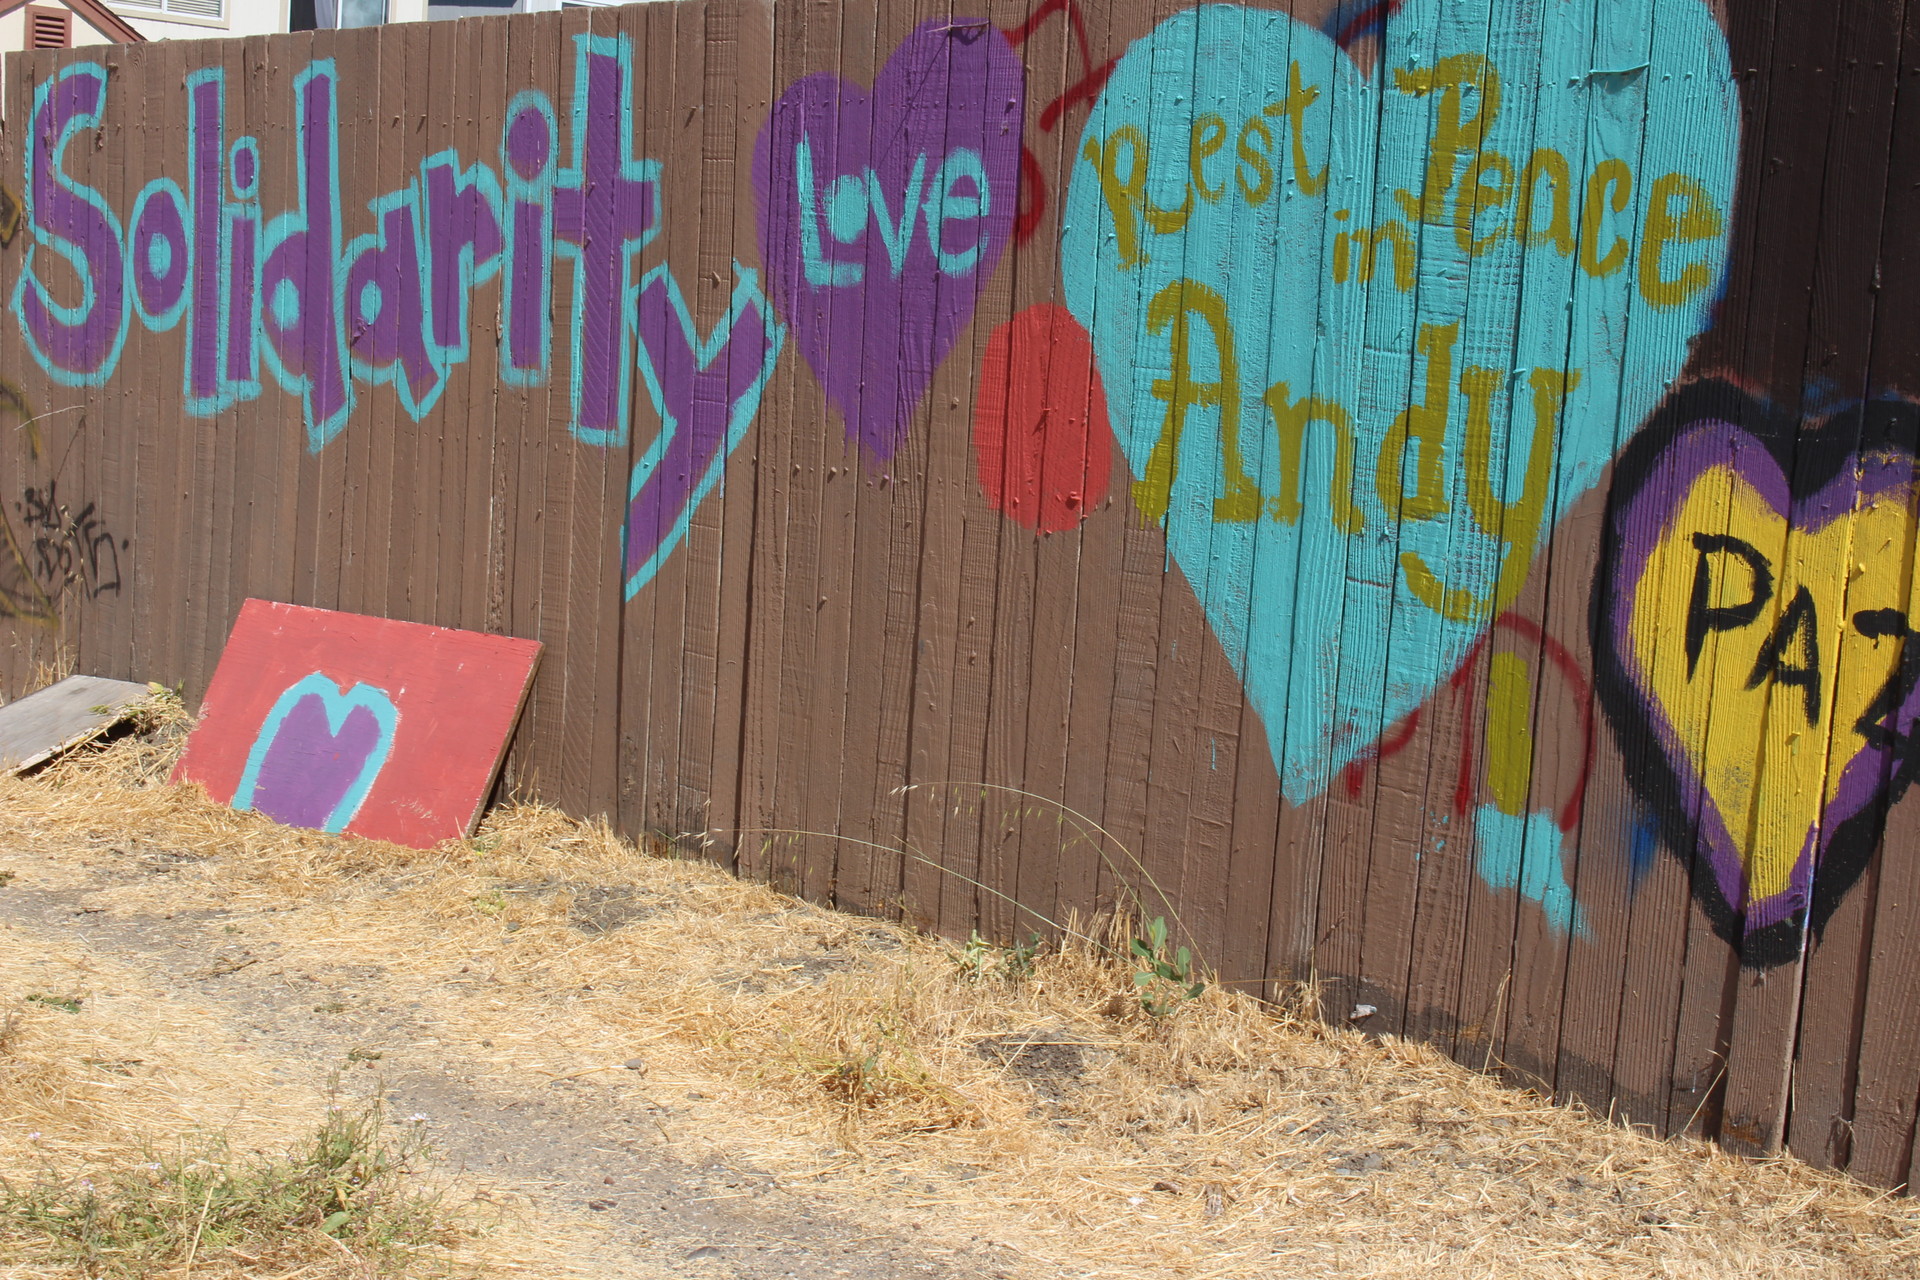 Paintings decorate a fence just feet away from where Andy Lopez died in 2013. Residents lobbied the county to build a park in the now empty lot. Construction of Andy's Unity Park is set to begin in the fall, with design input from residents.